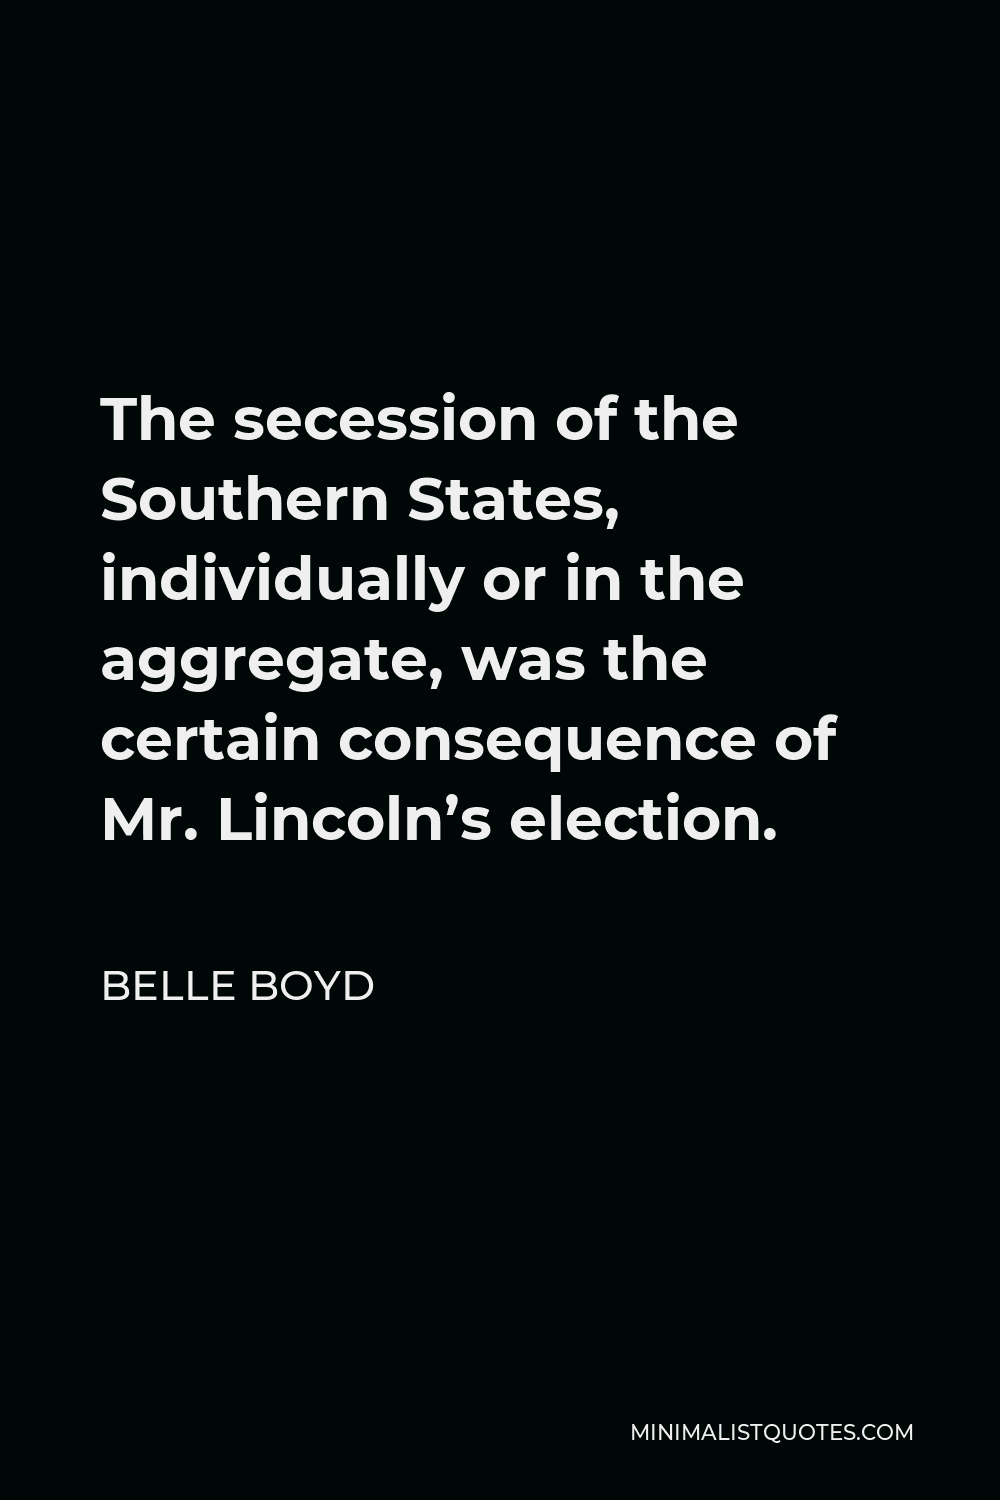 Belle Boyd Quote - The secession of the Southern States, individually or in the aggregate, was the certain consequence of Mr. Lincoln’s election.